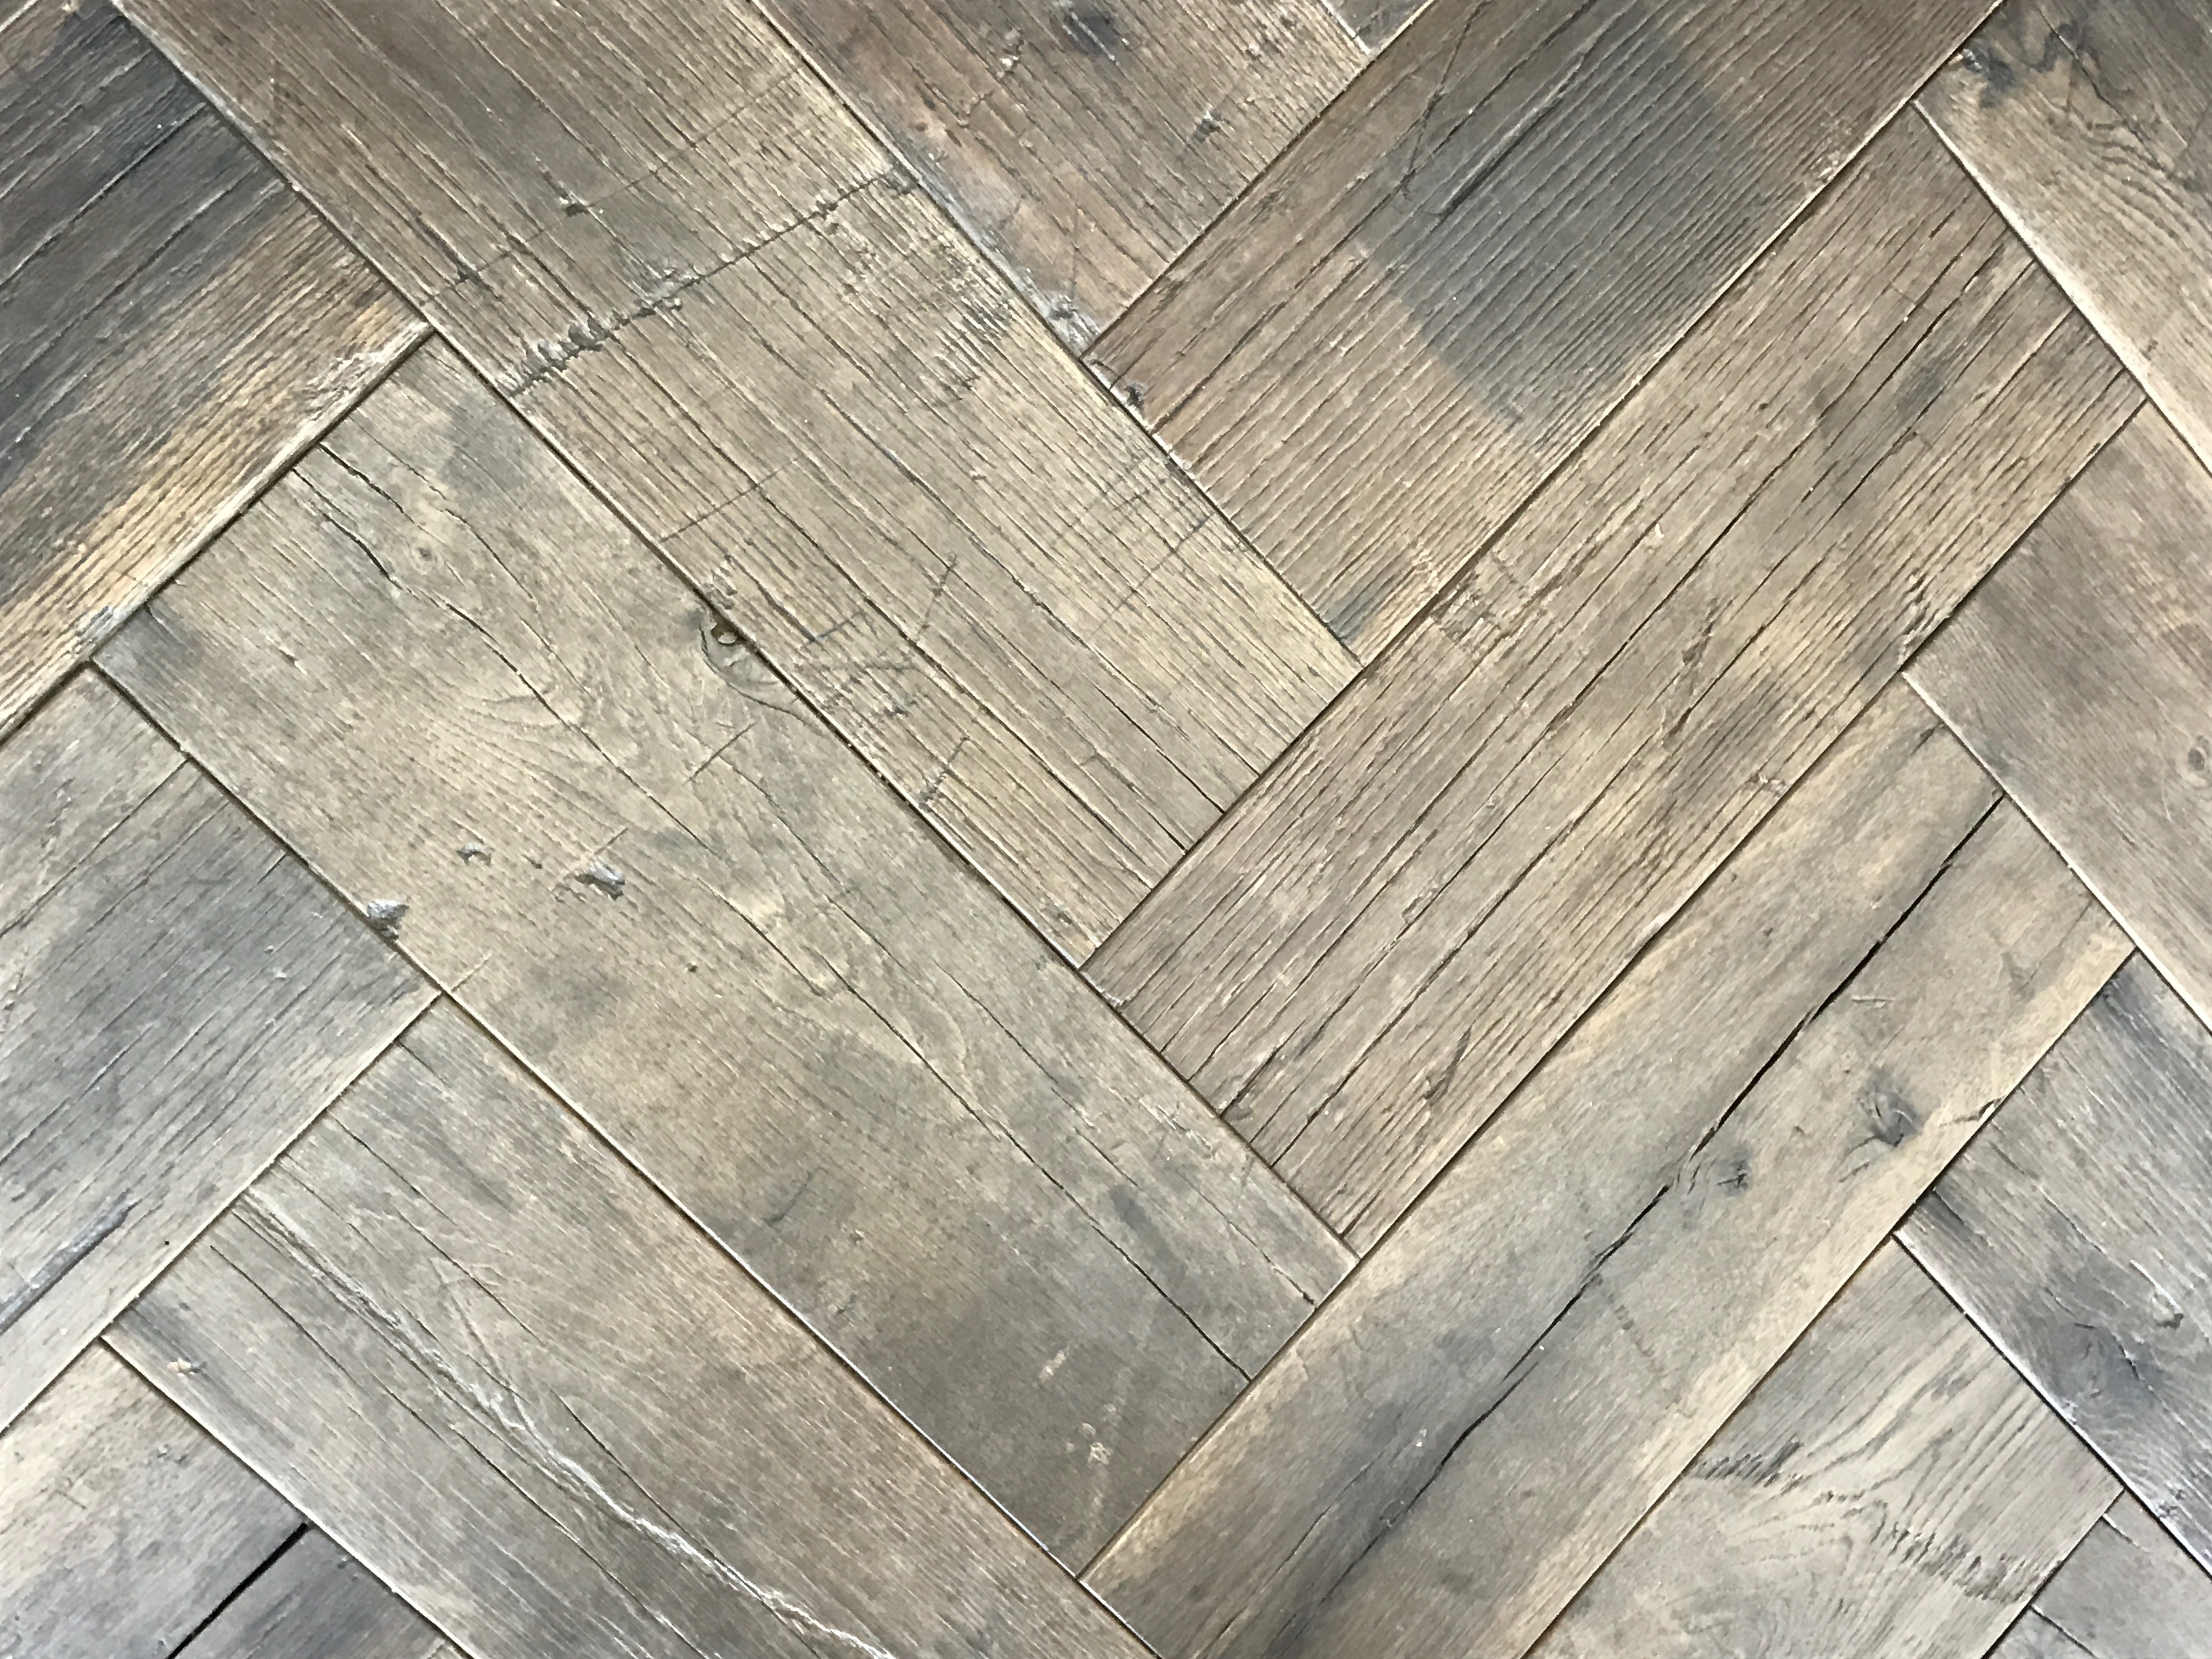 Herringbone floor made from cotton mill oak in a residence in Pemaquid, Maine, sourced by Rousseau Reclaimed Lumber & Flooring